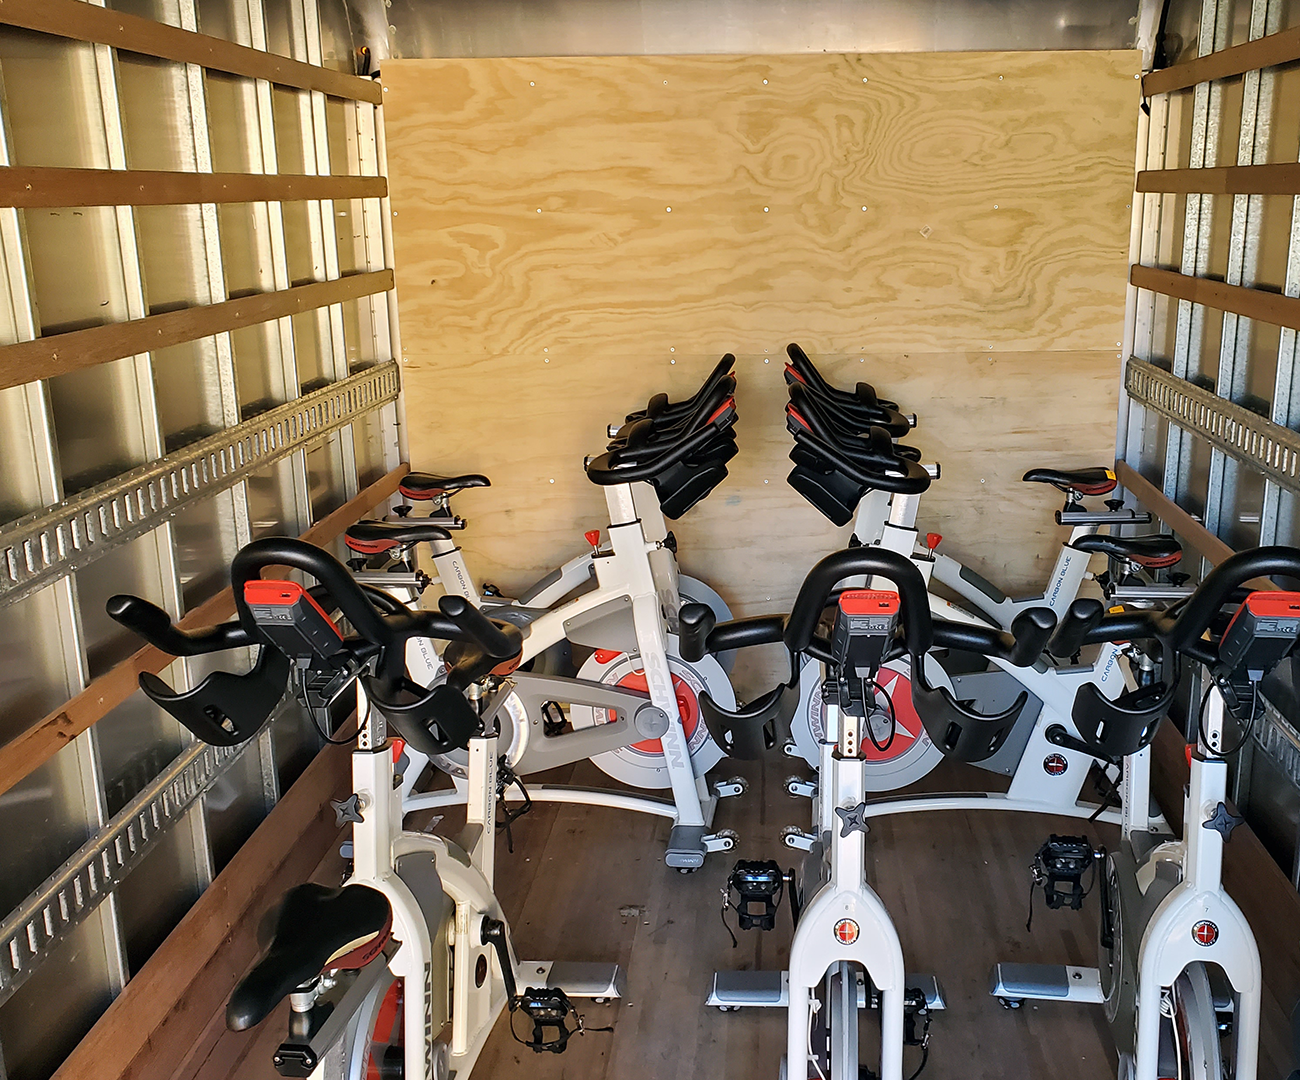 Indoor exercise bikes for group cycling classes